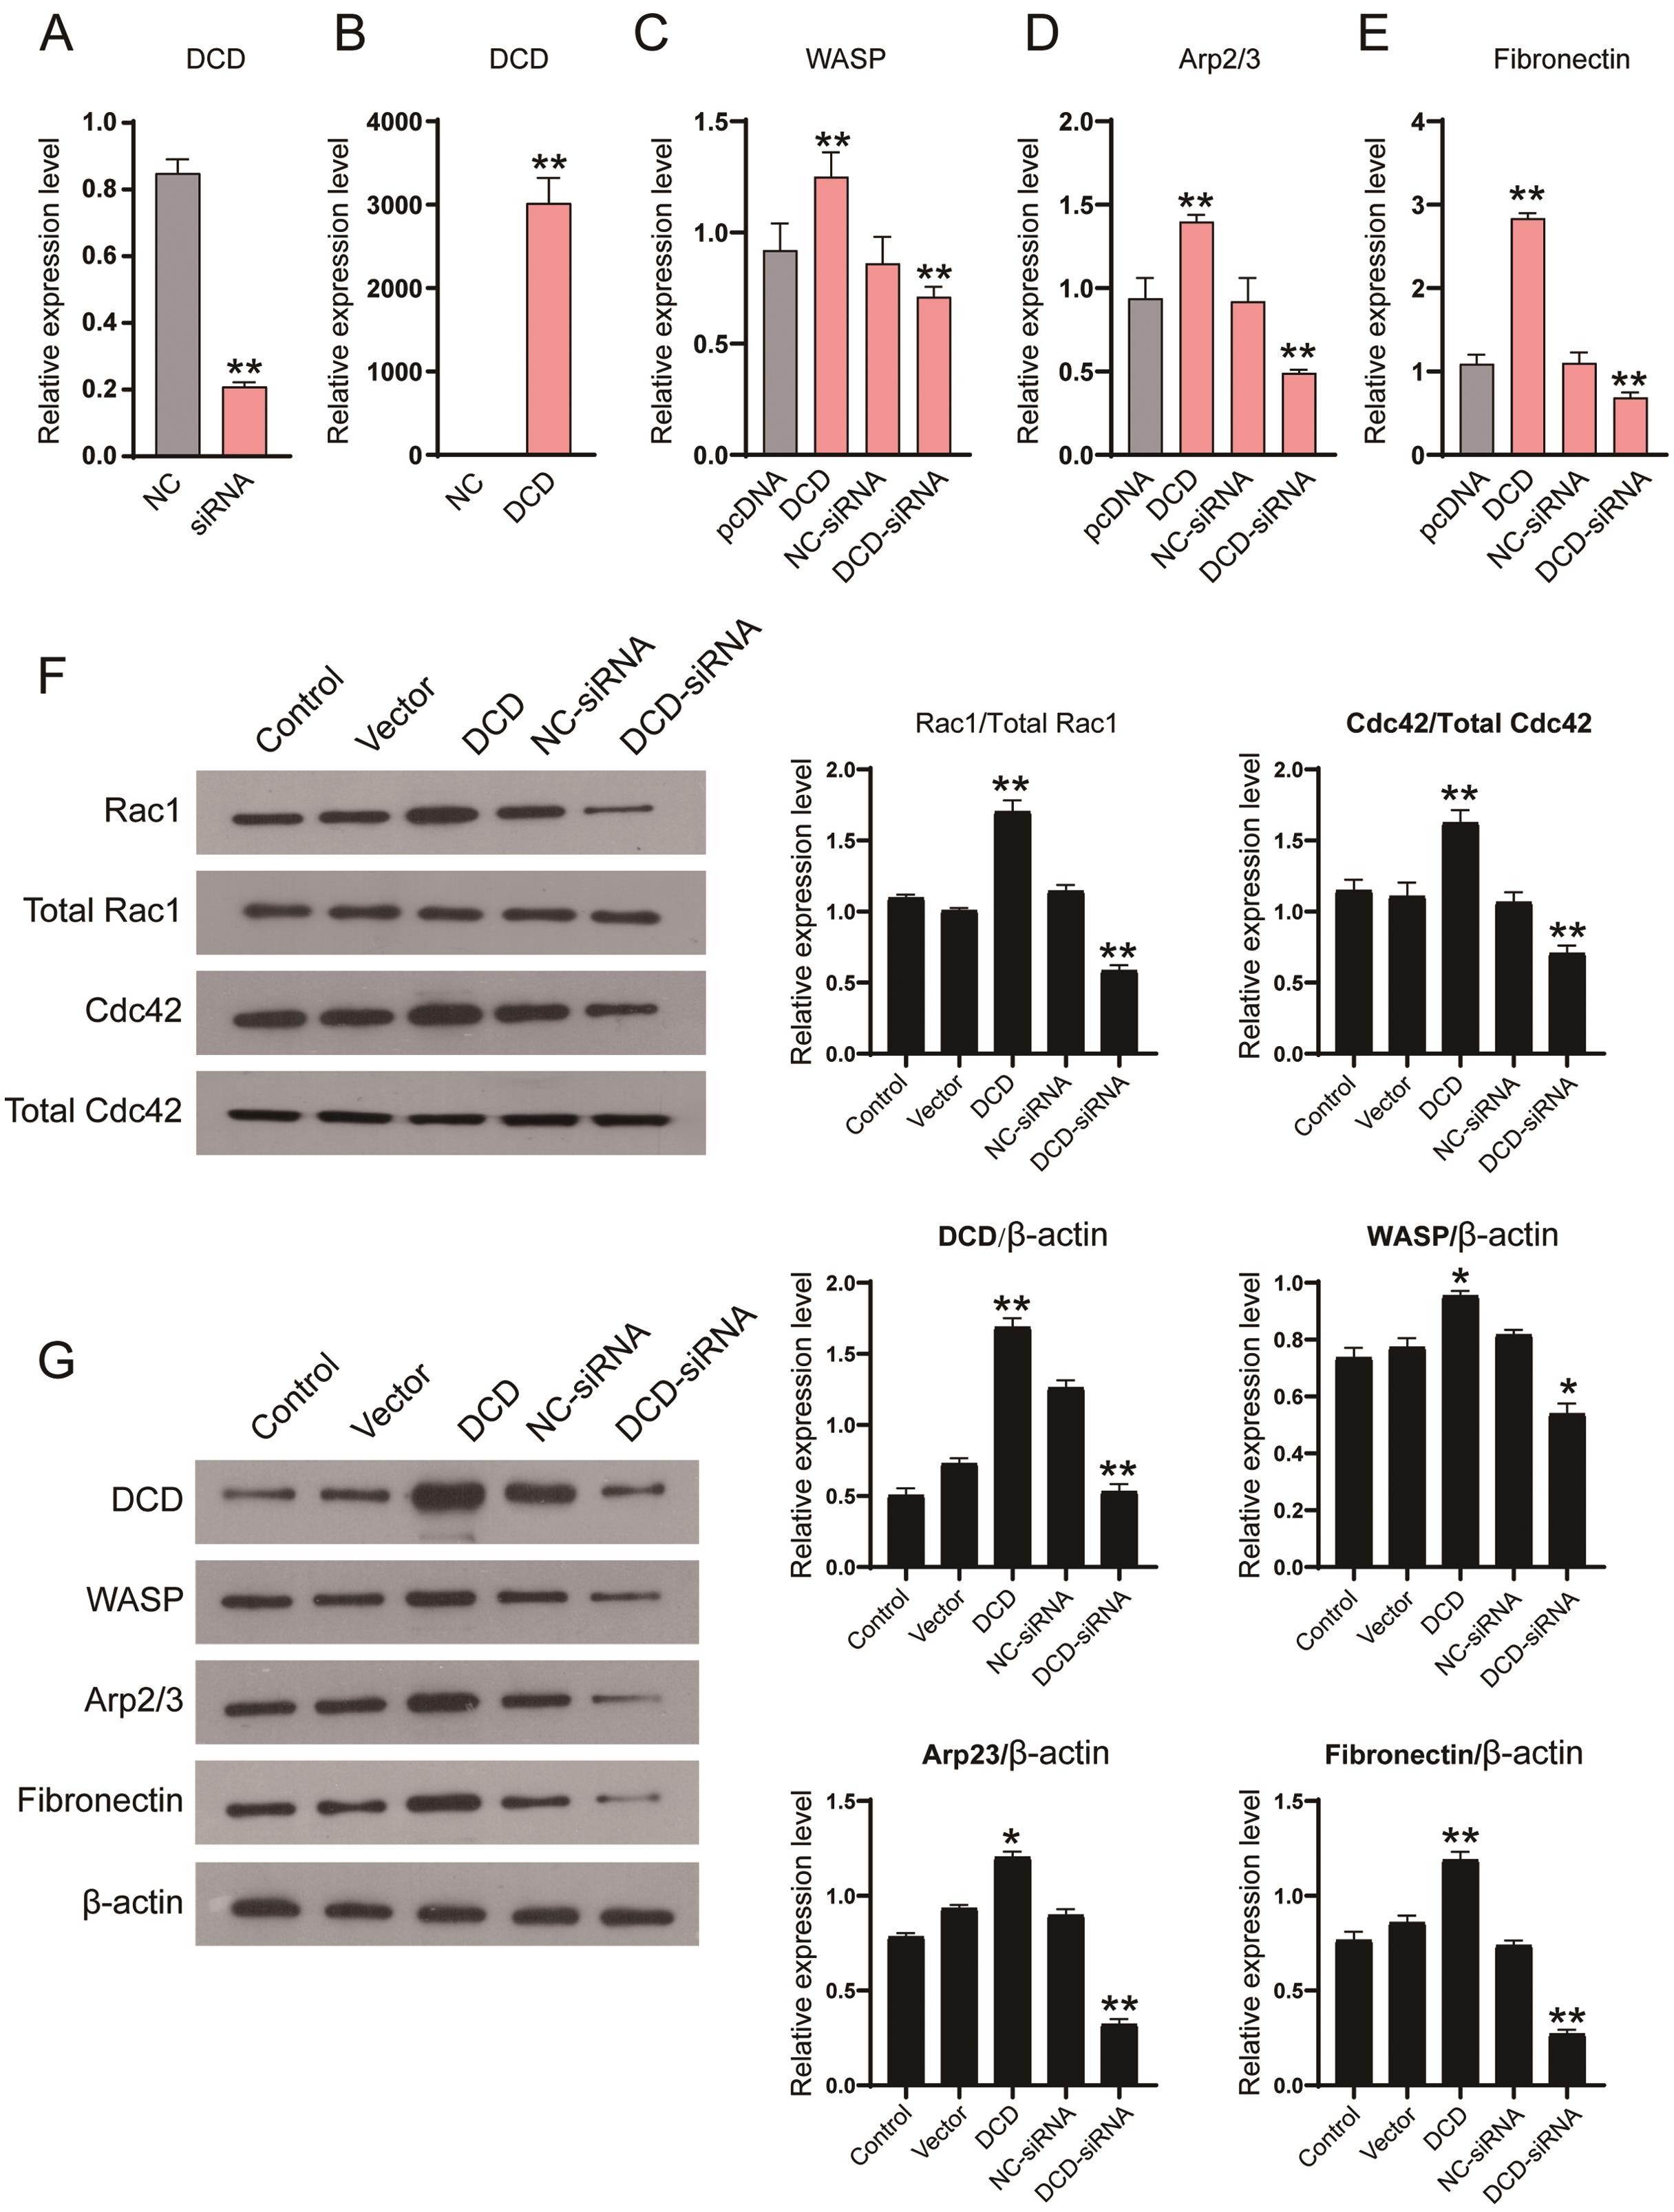 Detection of the DCD, fibronectin, WASP, and Arp2/3 mRNA and protein levels in SK-HEP-1 cells.